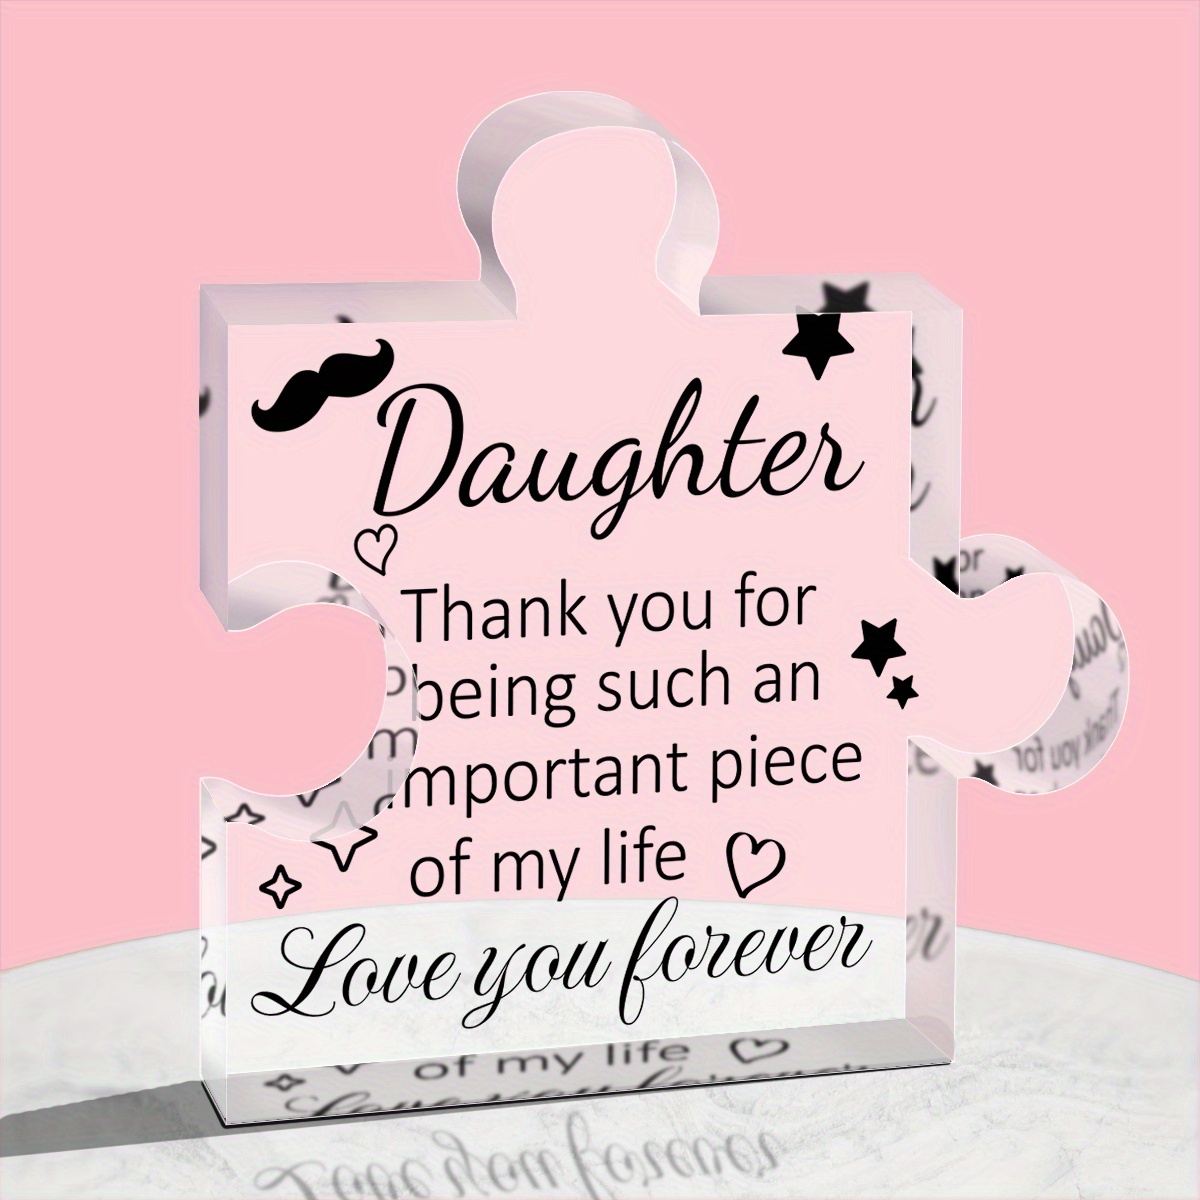 

1pc, Acrylic Desk Plaque Gifts For Daughter - You Will Always Be My Baby Girl - Daughter Gifts From Mom, Dad For Birthday, Graduation, Wedding - Halloween Thanksgiving Christmas Day Gifts For Daughter